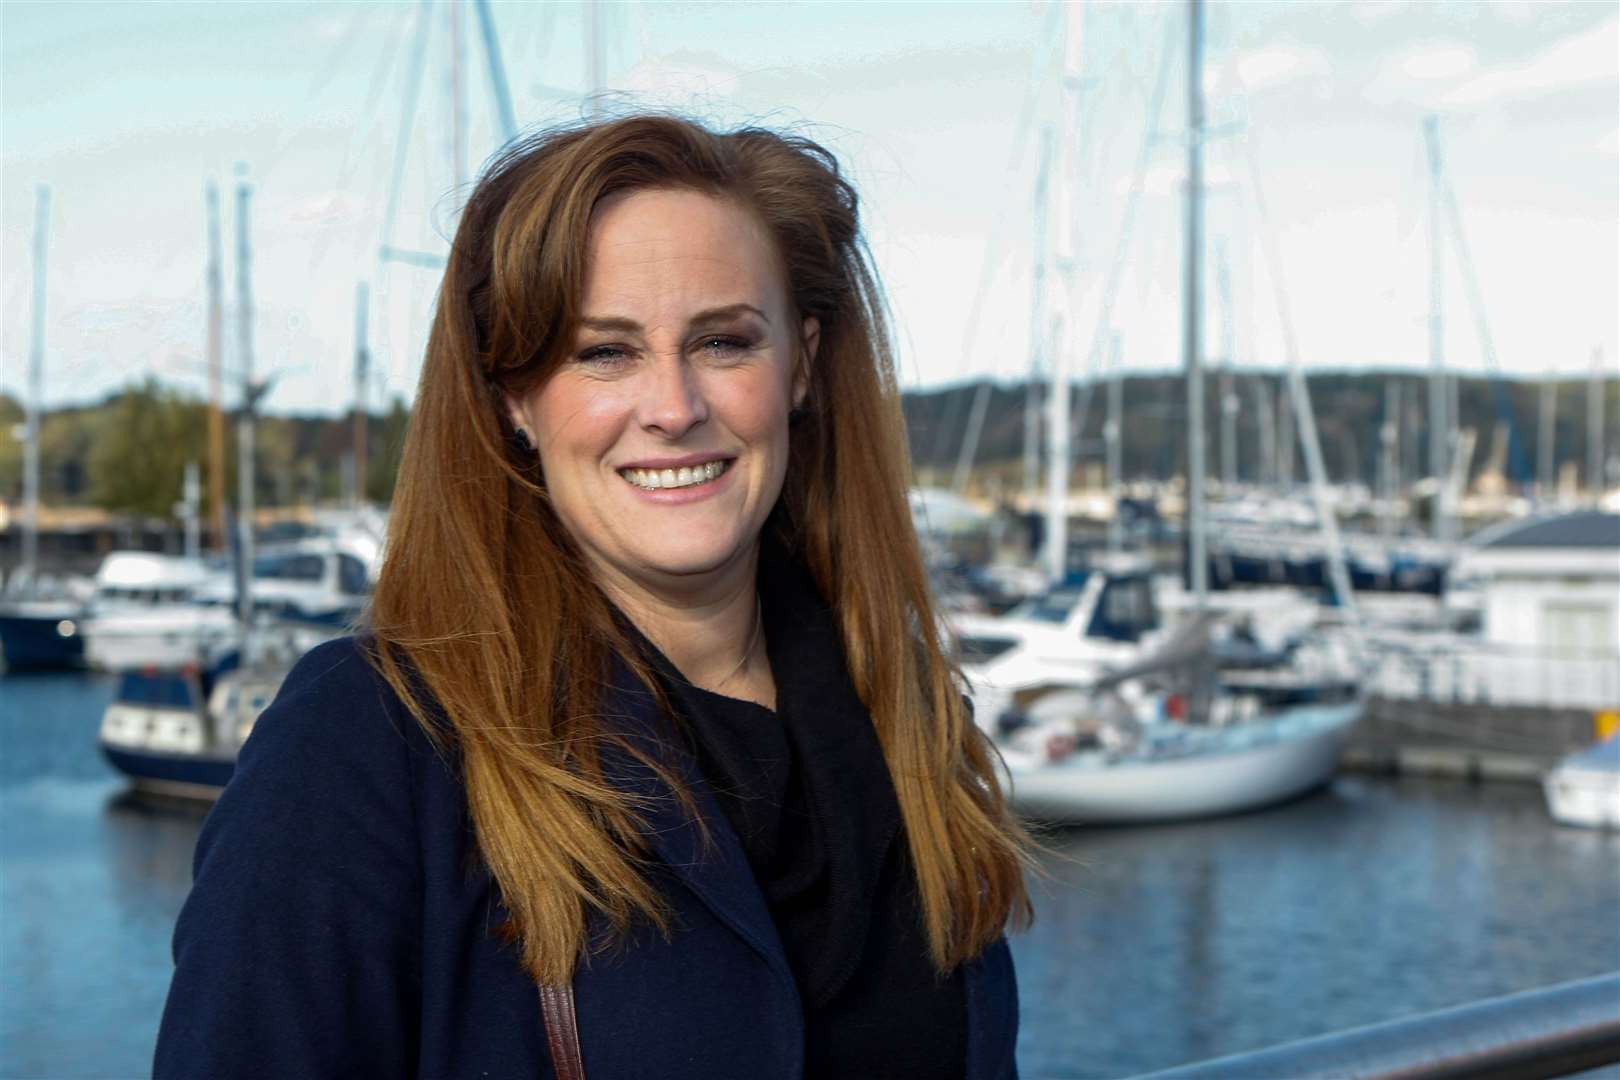 Kelly Tolhurst is going to discuss the plans with the Prime Minister. Pictures: Darren Small